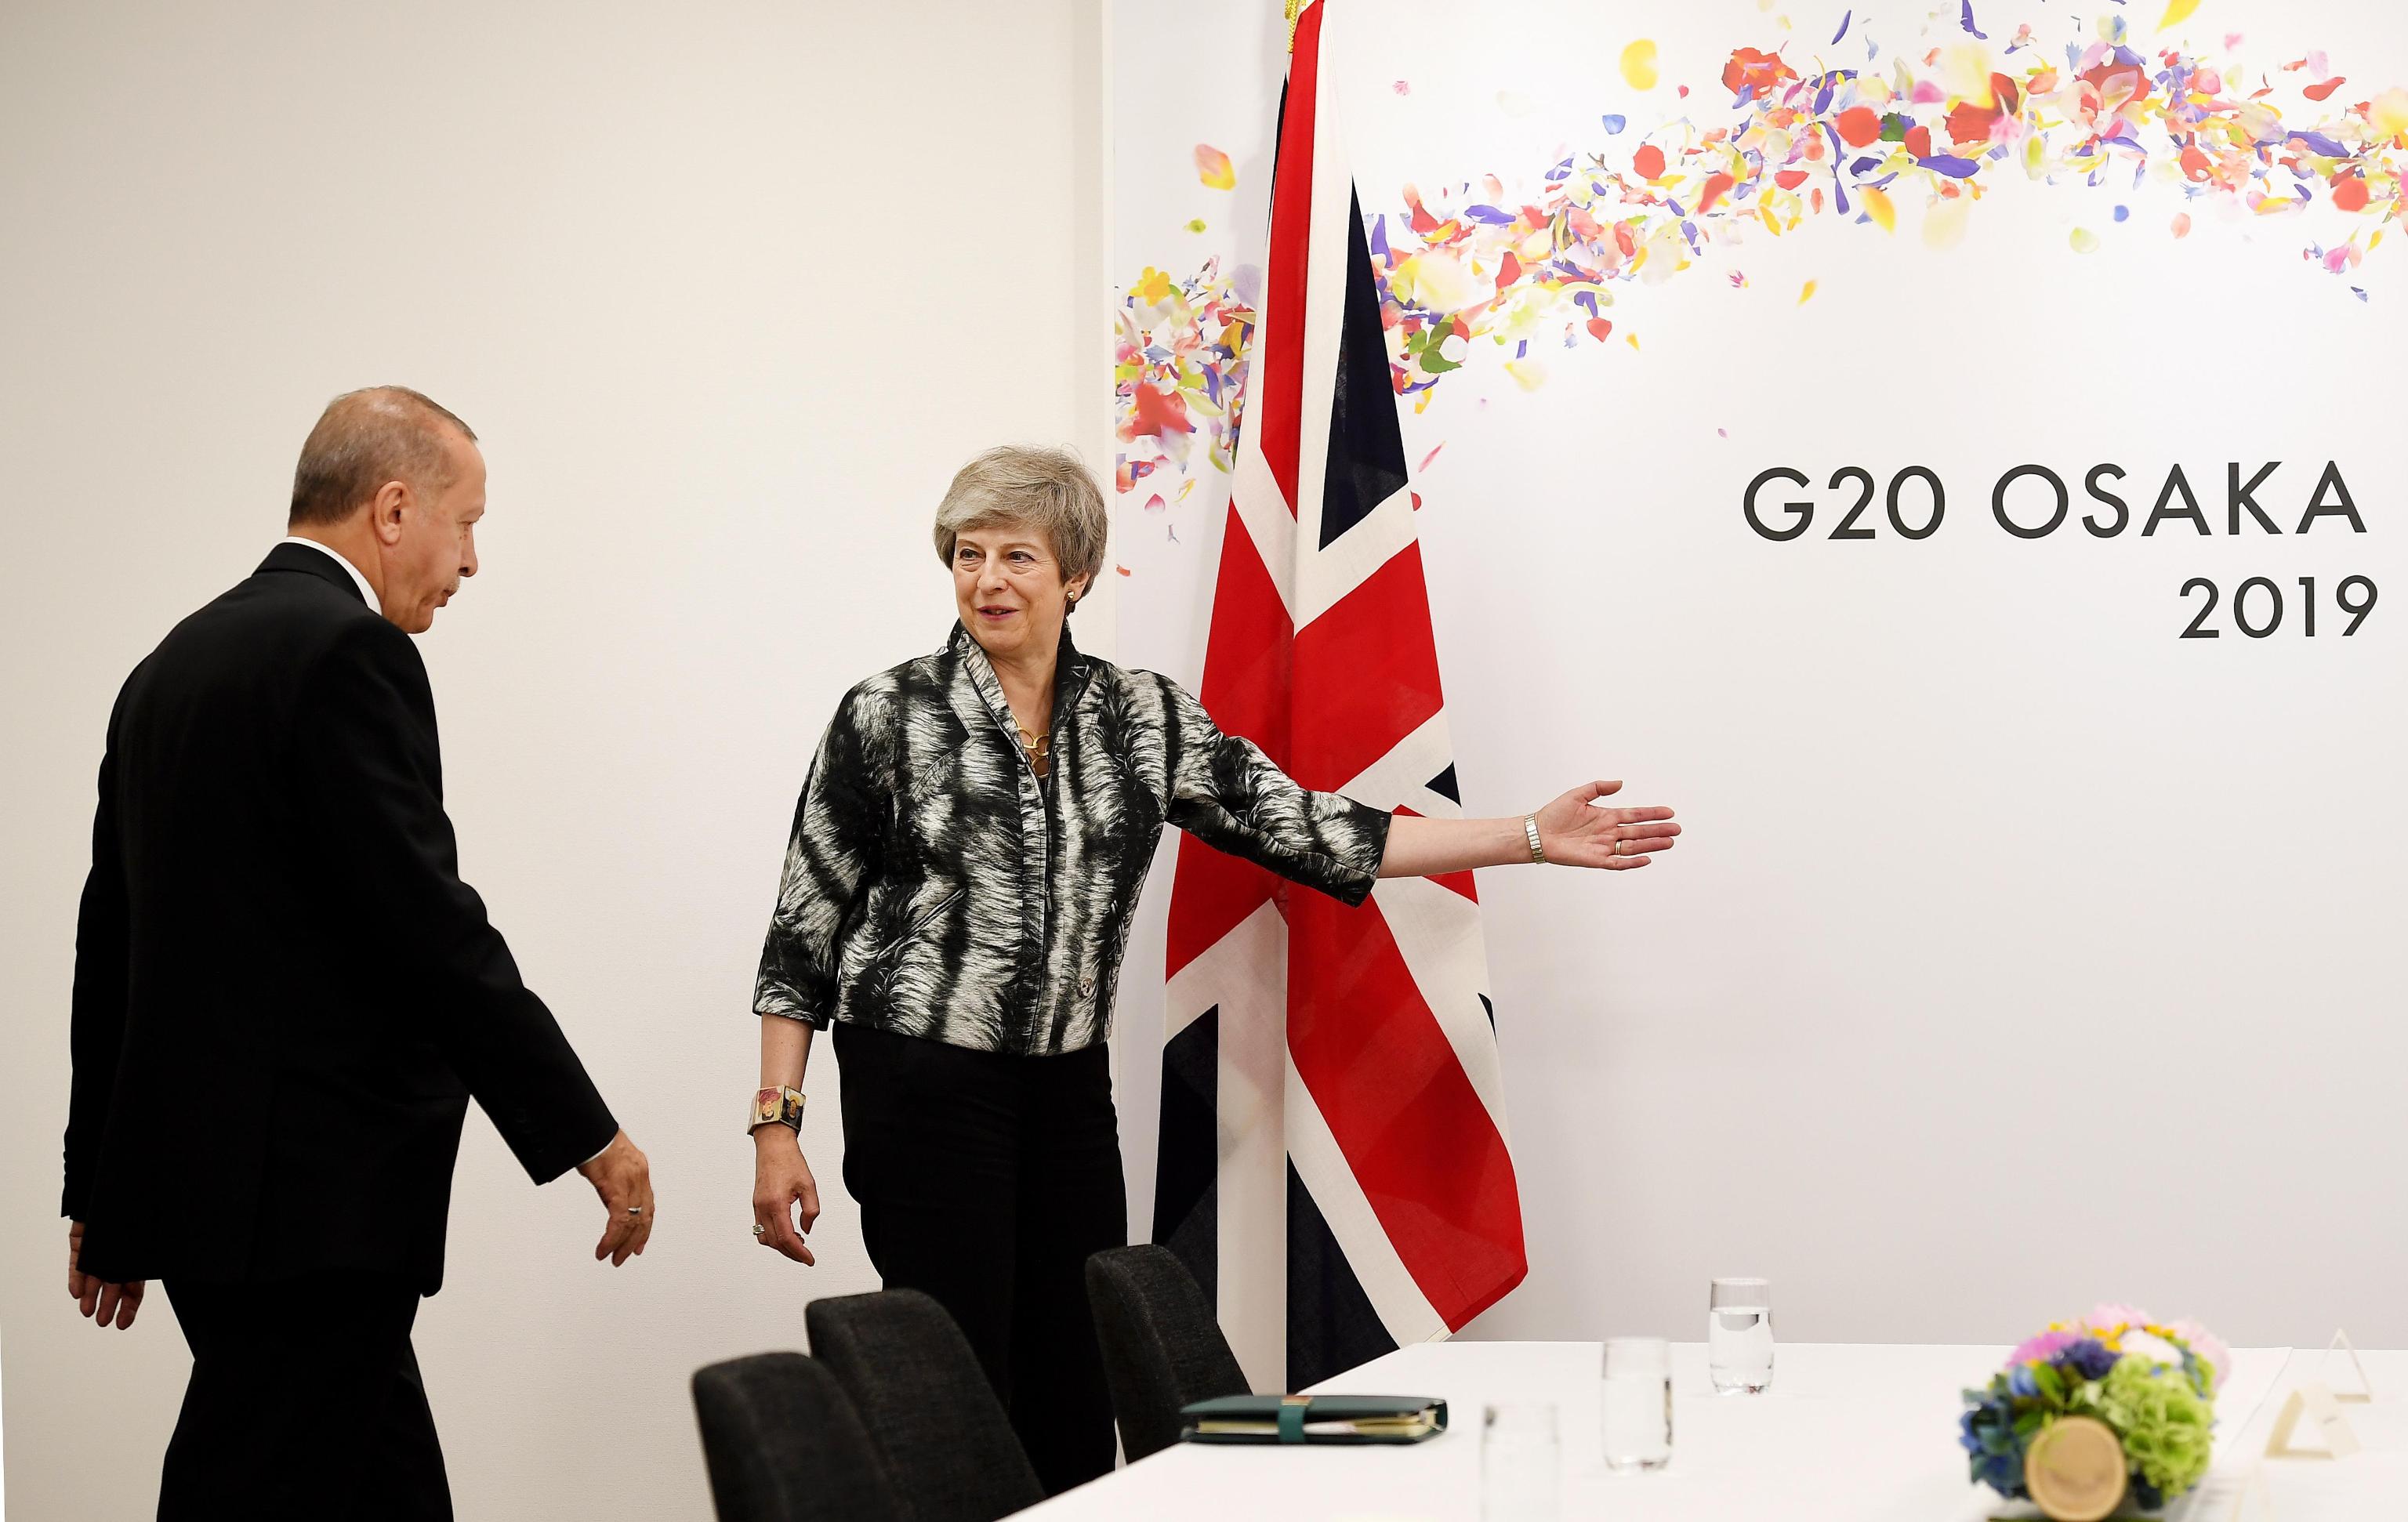 epa07681580 British Prime Minister Theresa May (R) gestures to Turkish President Recep Tayyip Erdogan (L) ahead of talks on the second day of the G20 Summit in Osaka, Japan, 29 June 2019. It is the first time that Japan hosts a G20 summit. The summit gathers leaders from 19 countries and the European Union to discuss topics such as global economy, trade and investment, innovation and employment.  EPA/ANDY RAIN / POOL